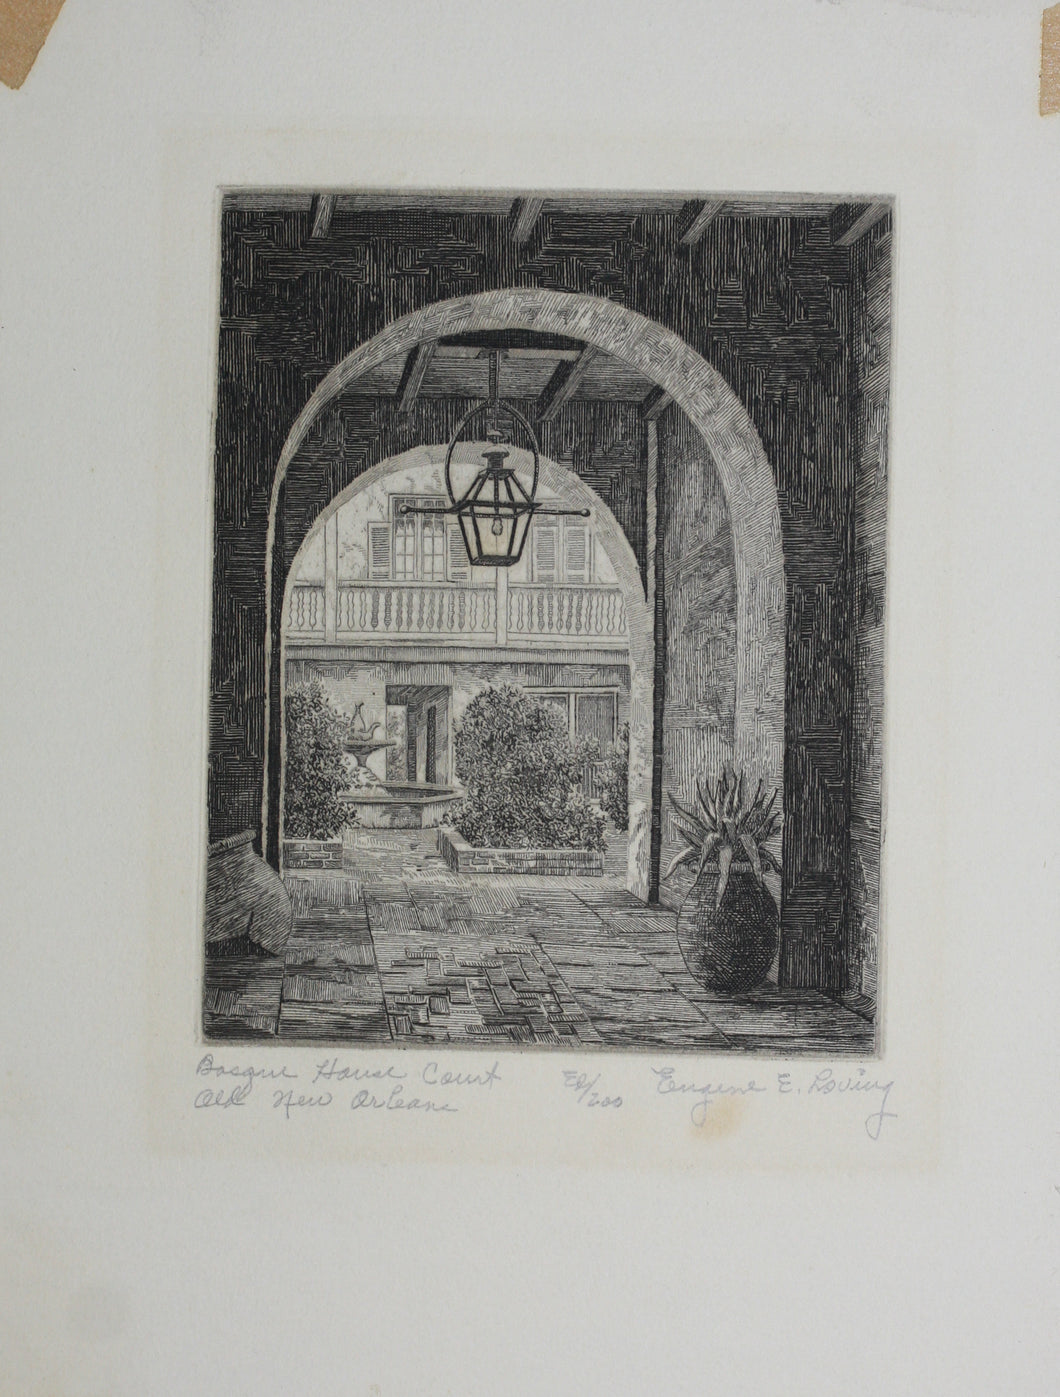 Eugene E. Loving. Basque House Court, Old New Orleans. Etching. 20th c.